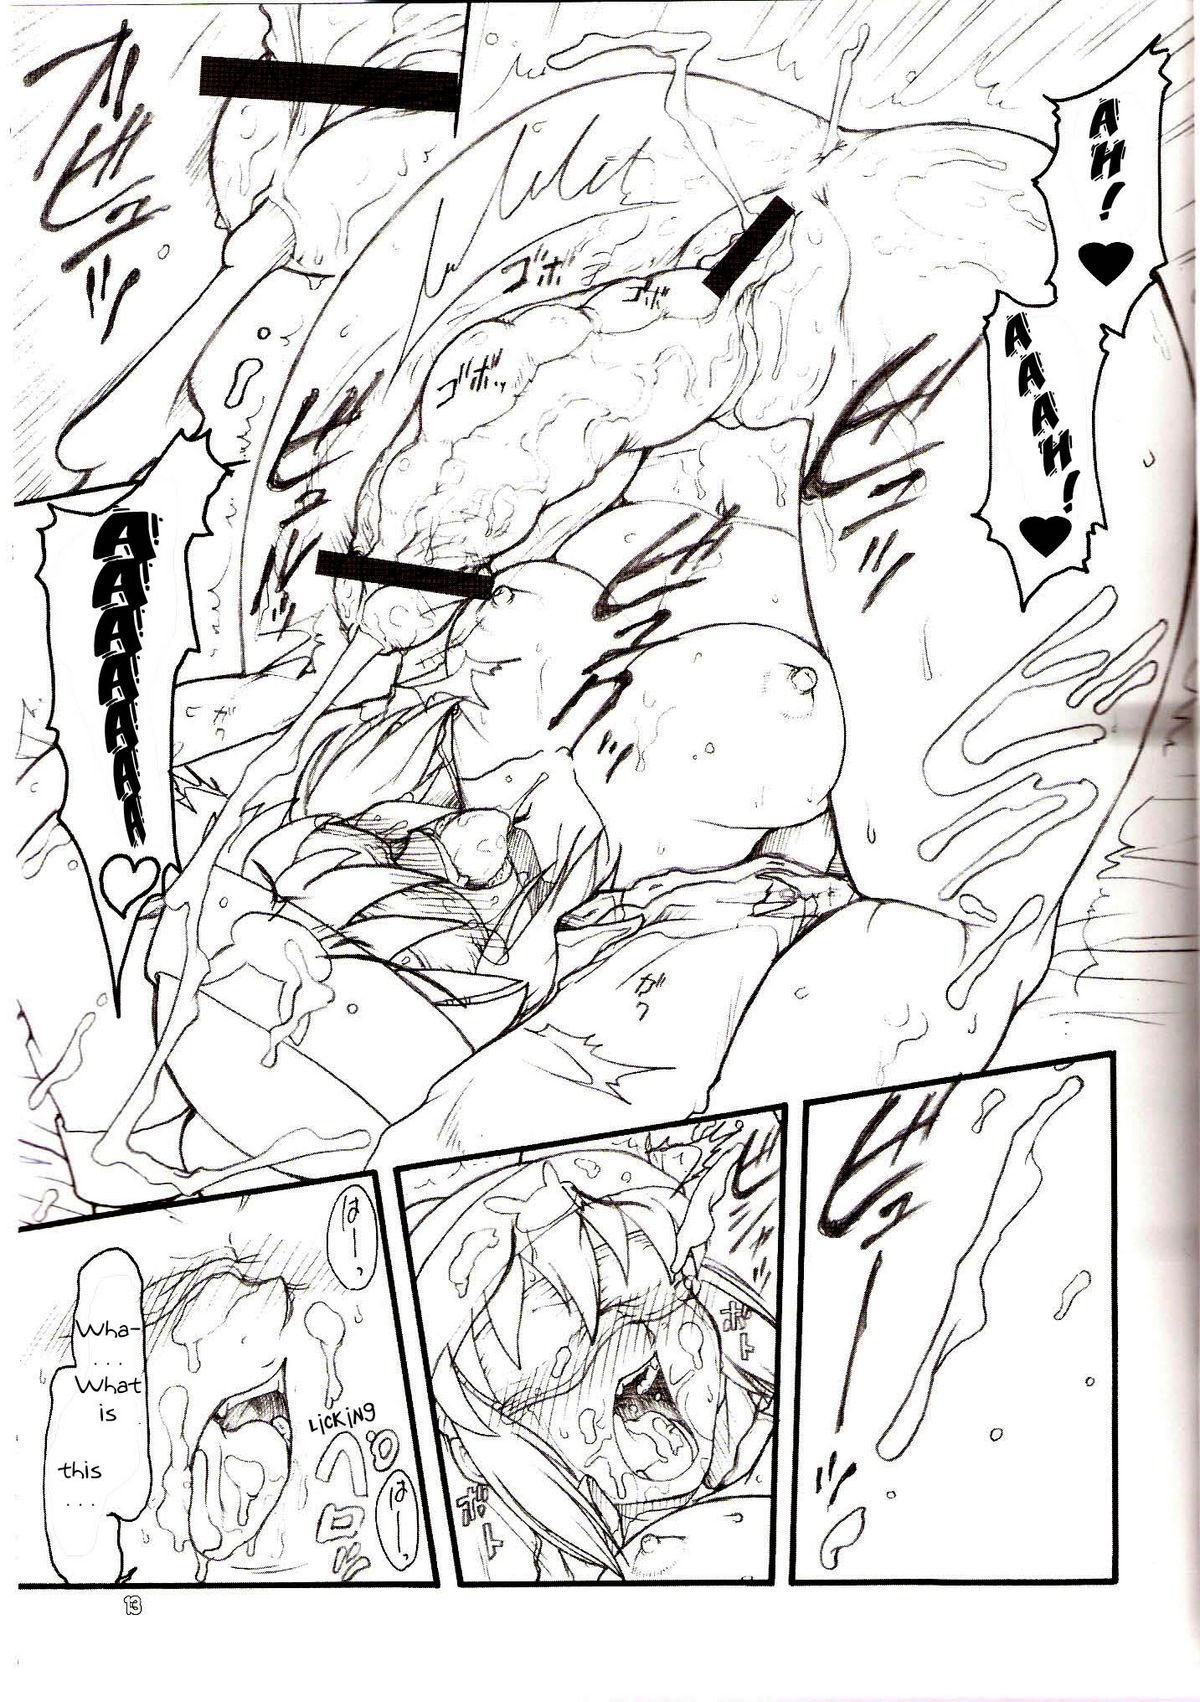 Groping UsagiErection2nd - Gotcha force Barely 18 Porn - Page 13